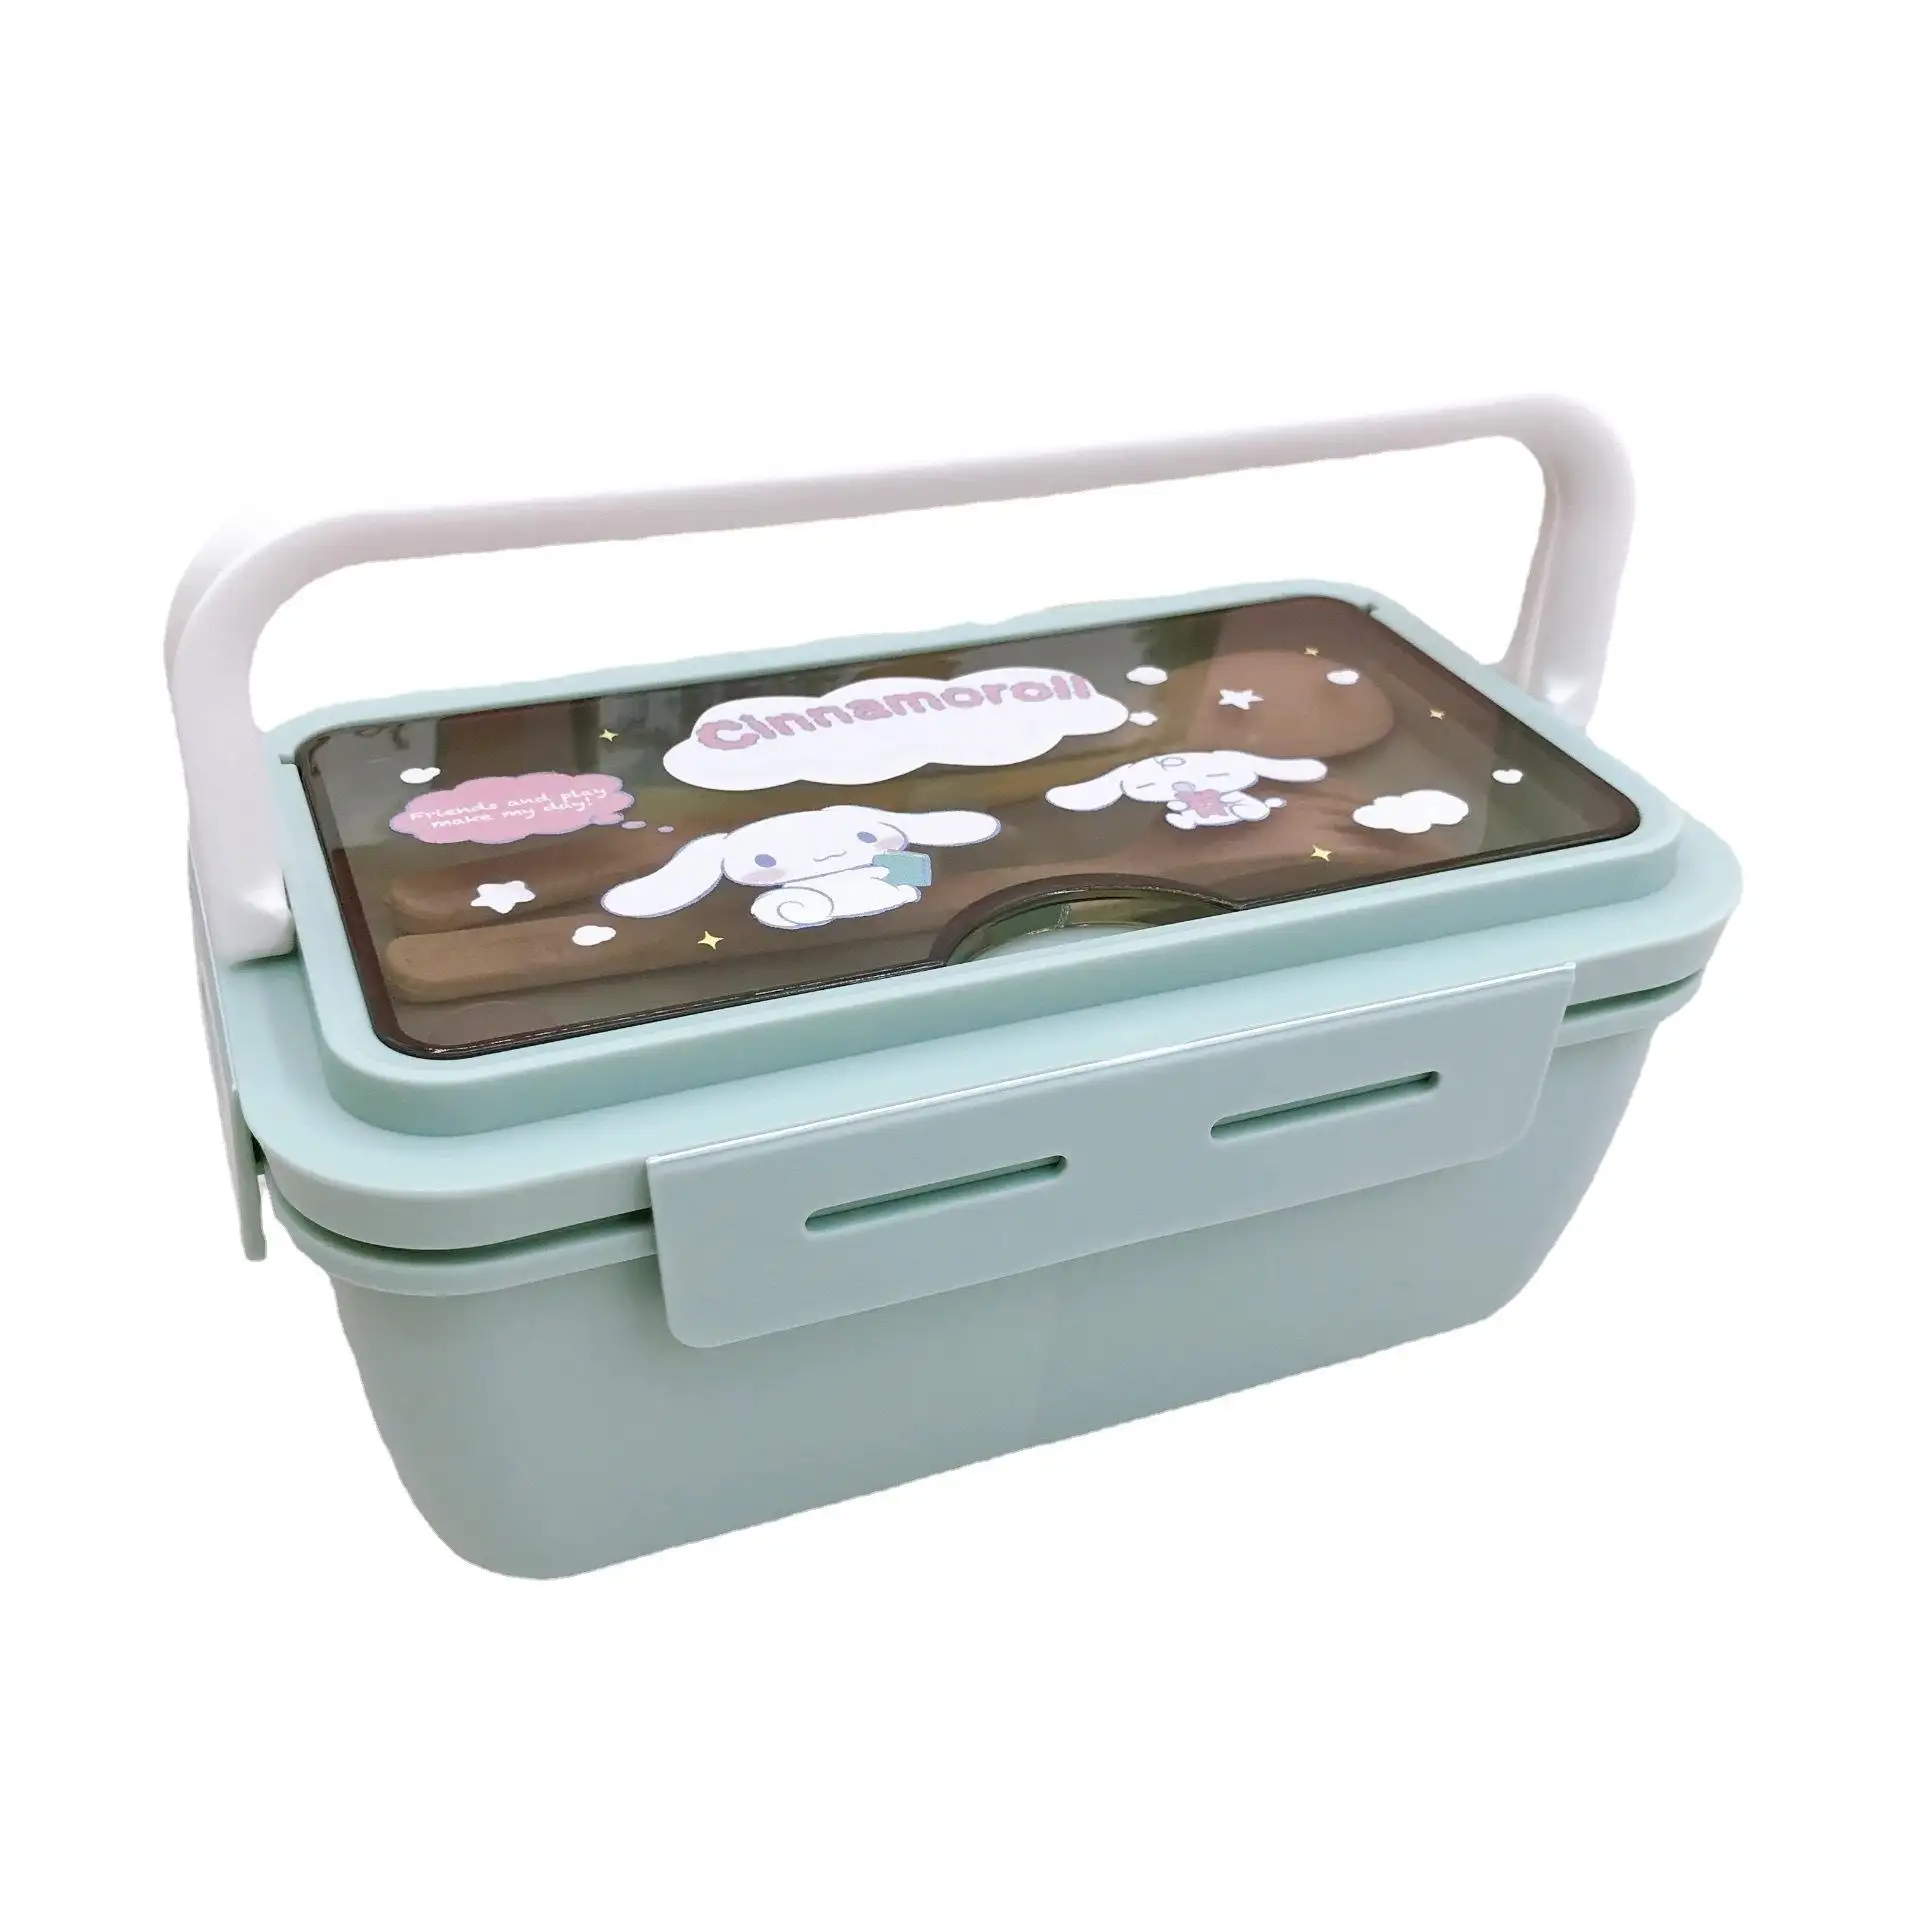 Cinnamoroll portable lunch box comes with cutlery Kuromi Children's multi-compartment bento box Student lunchbox